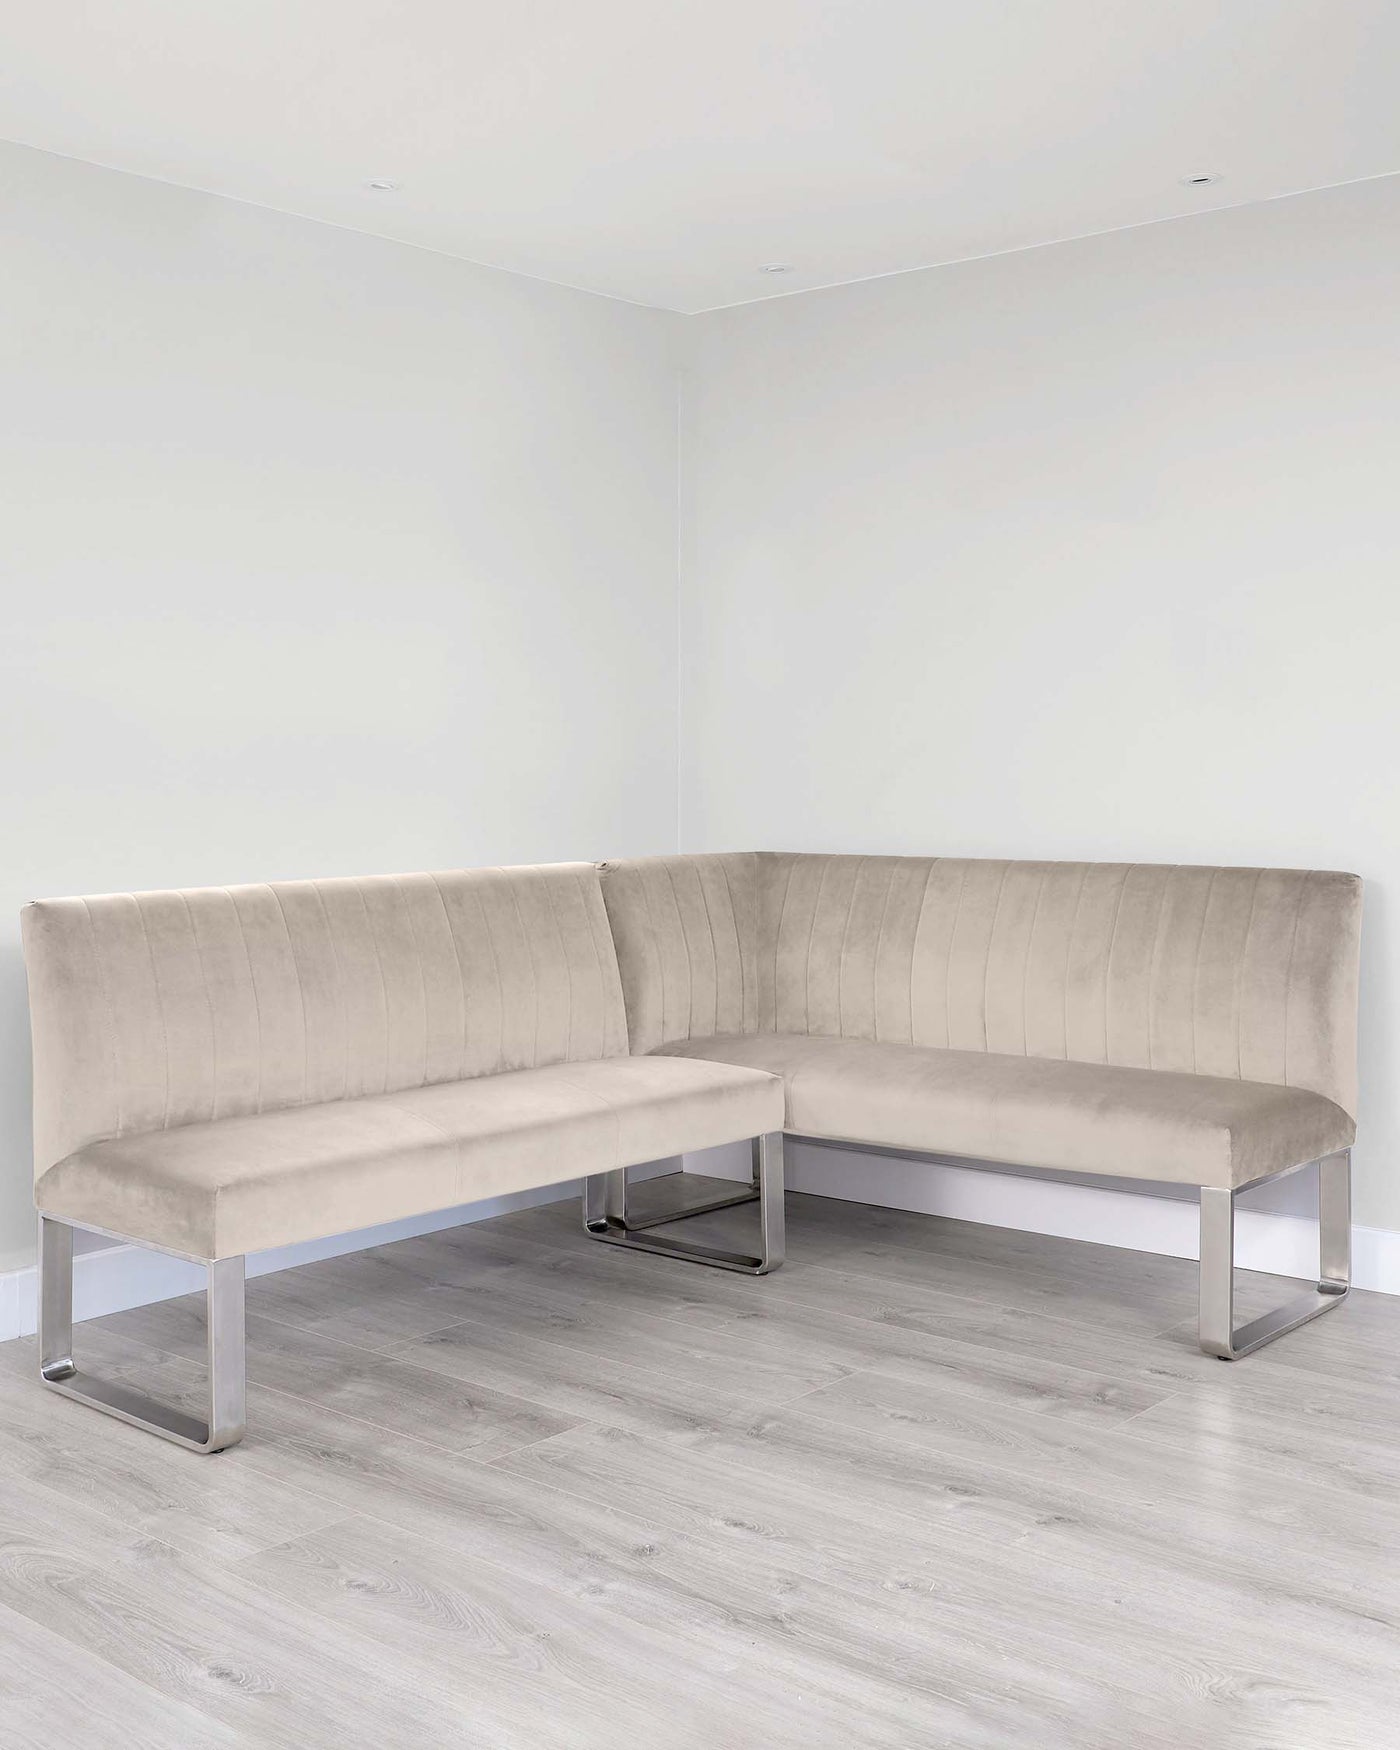 L-shaped sectional sofa with a contemporary design, featuring plush backrests with vertical stitching, an upholstered seat in a light beige fabric, and sleek metallic legs.